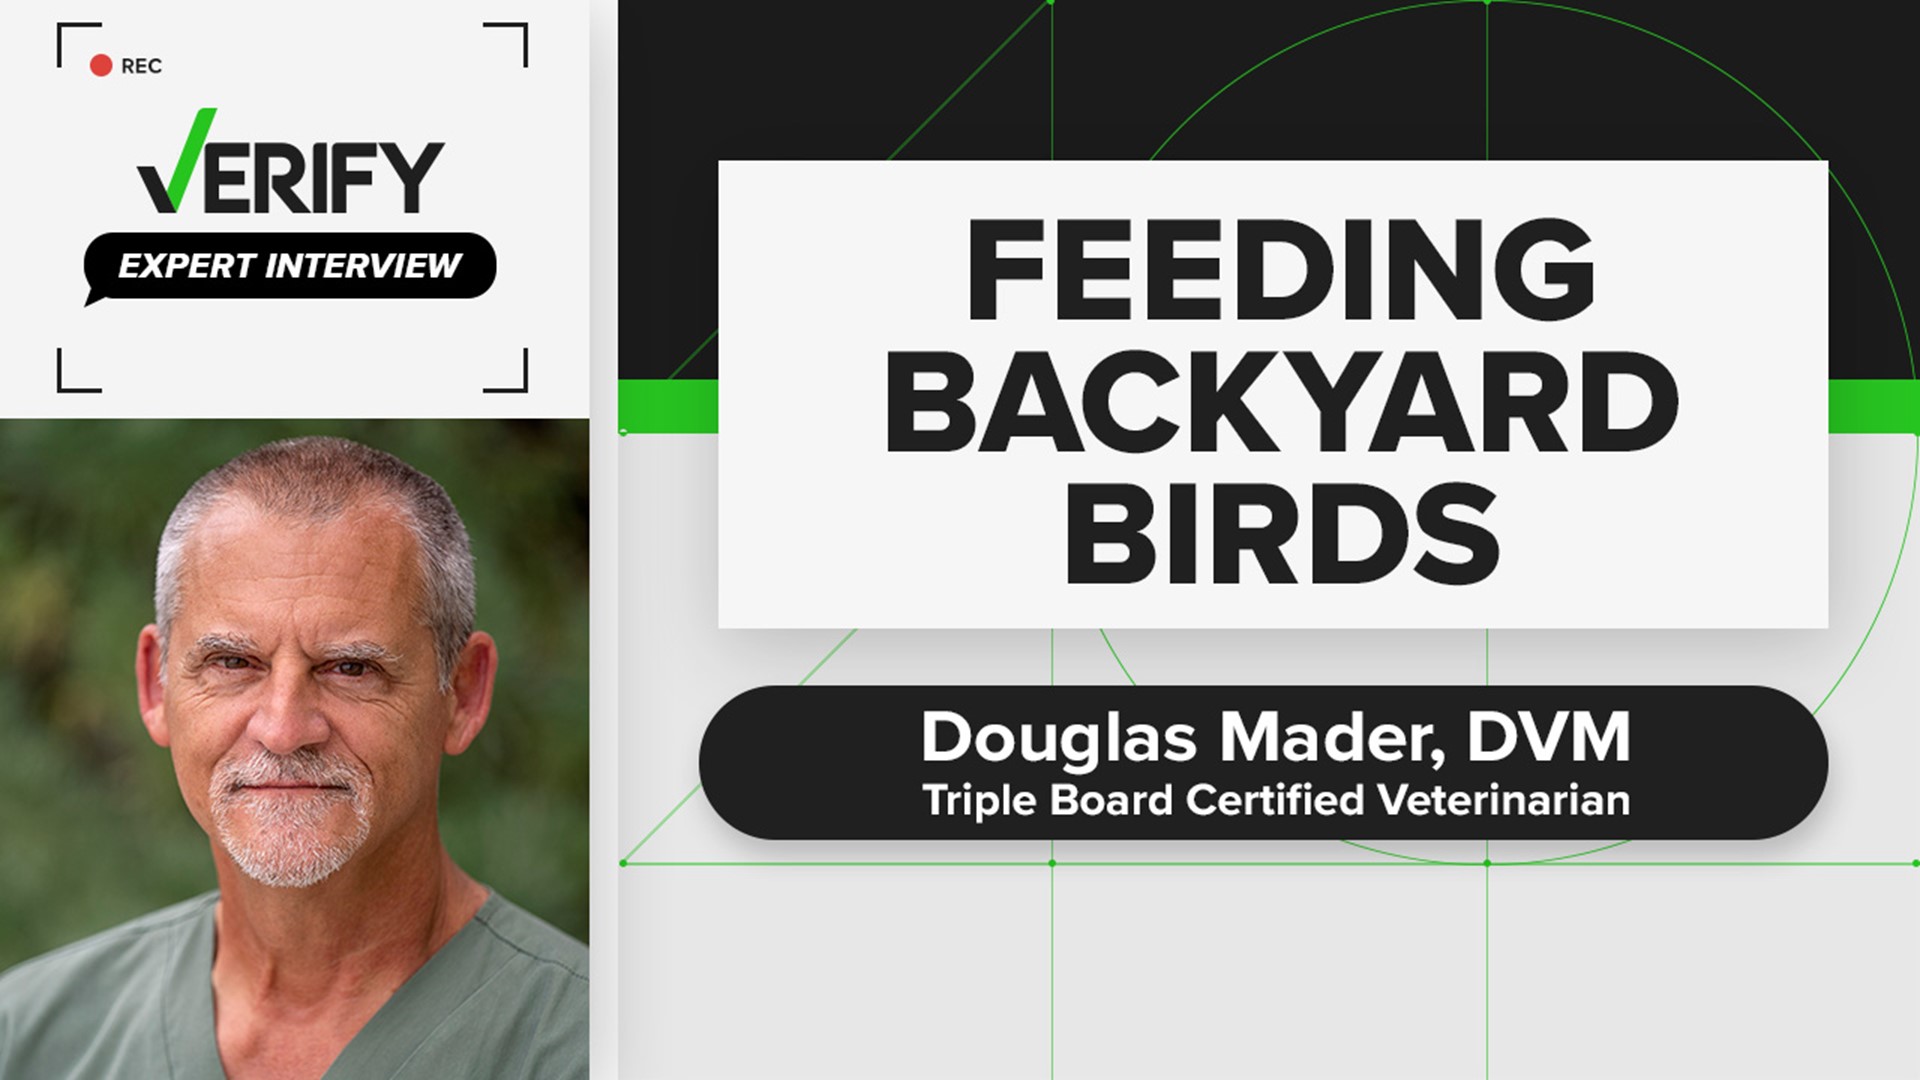 Dr. Douglas Mader talks about how too much cooking fat and human food can be bad, not only on backyard birds but other pets as well.